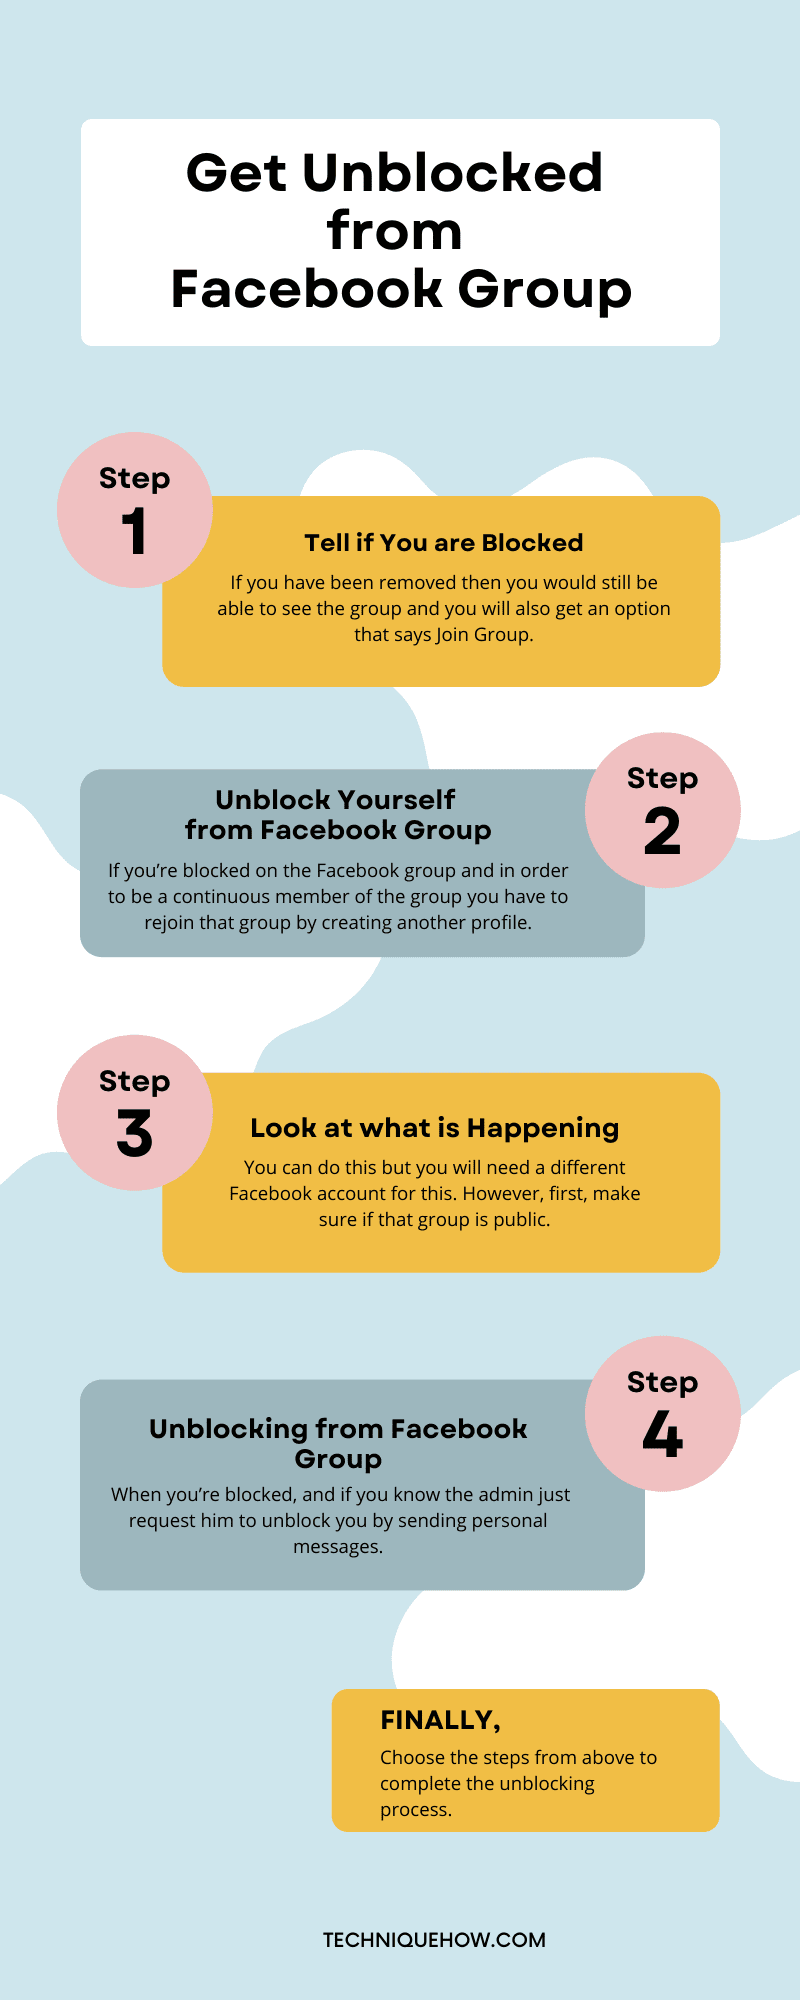 Infographic_Get Unblocked from Facebook Group